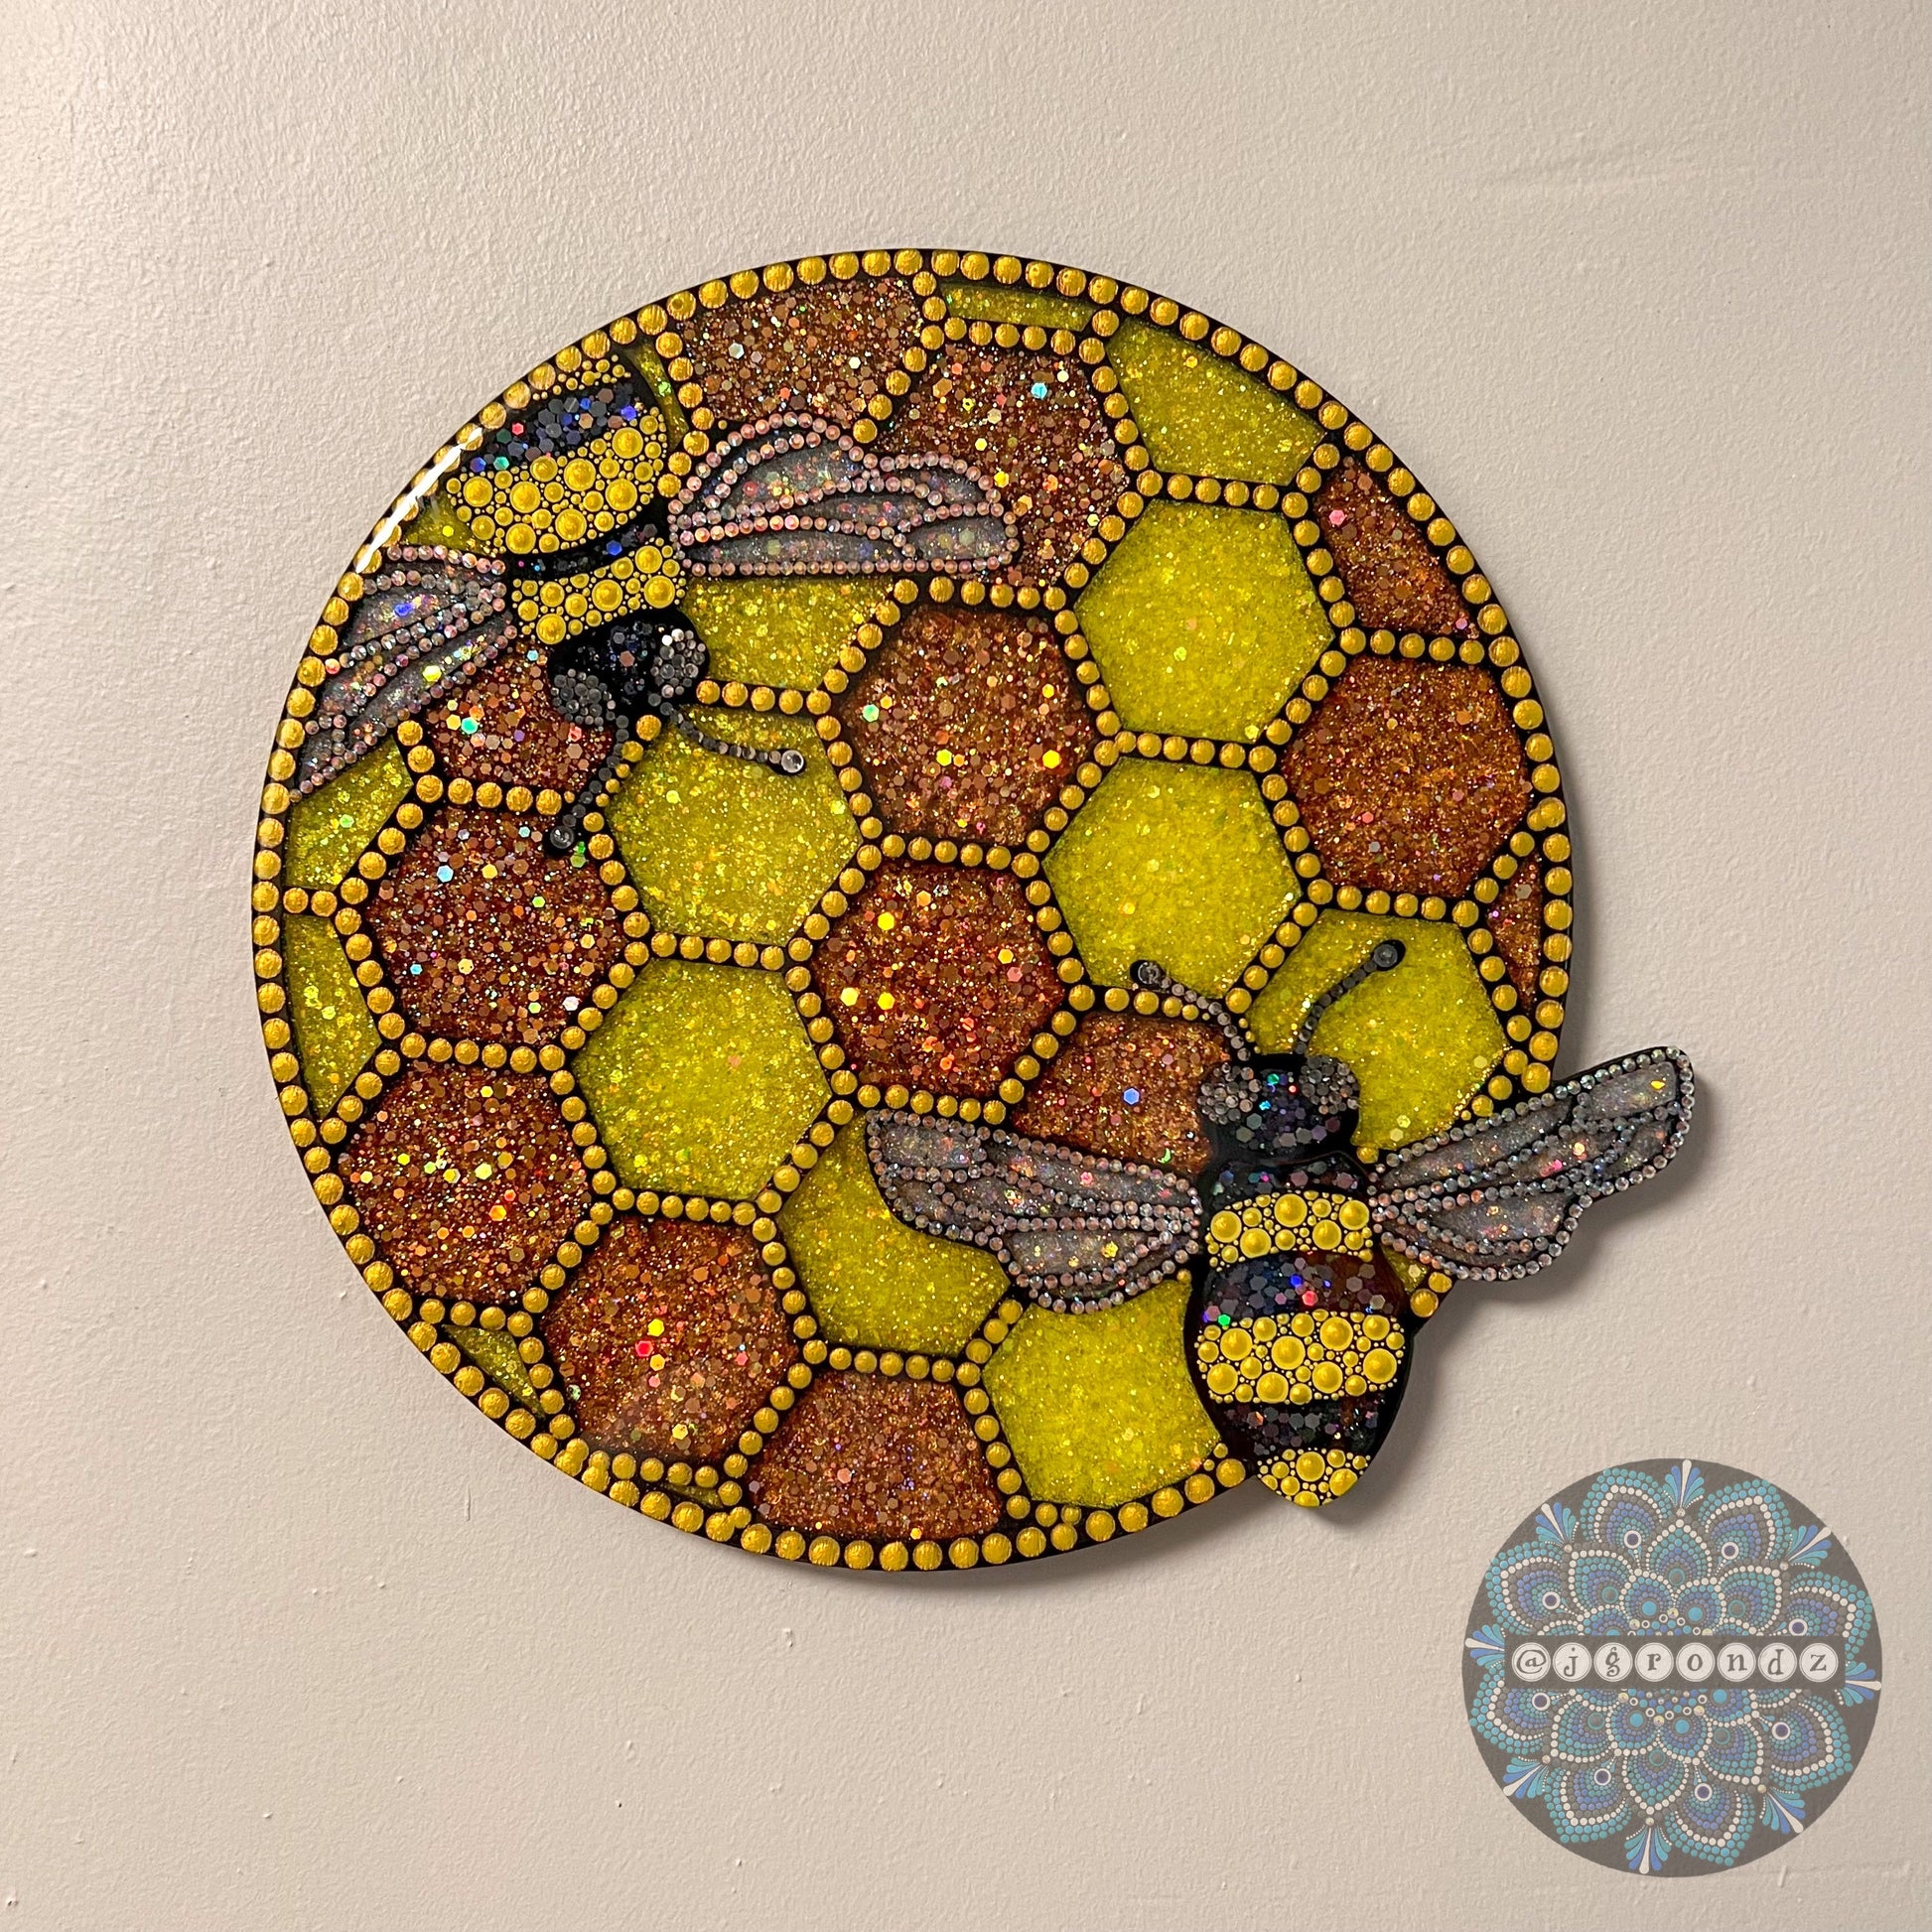 Honeycomb and Bee - Wooden Laser Cut Wall Decoration - Multiple Sizes -  Bumble Bee - Wooden Cut Out